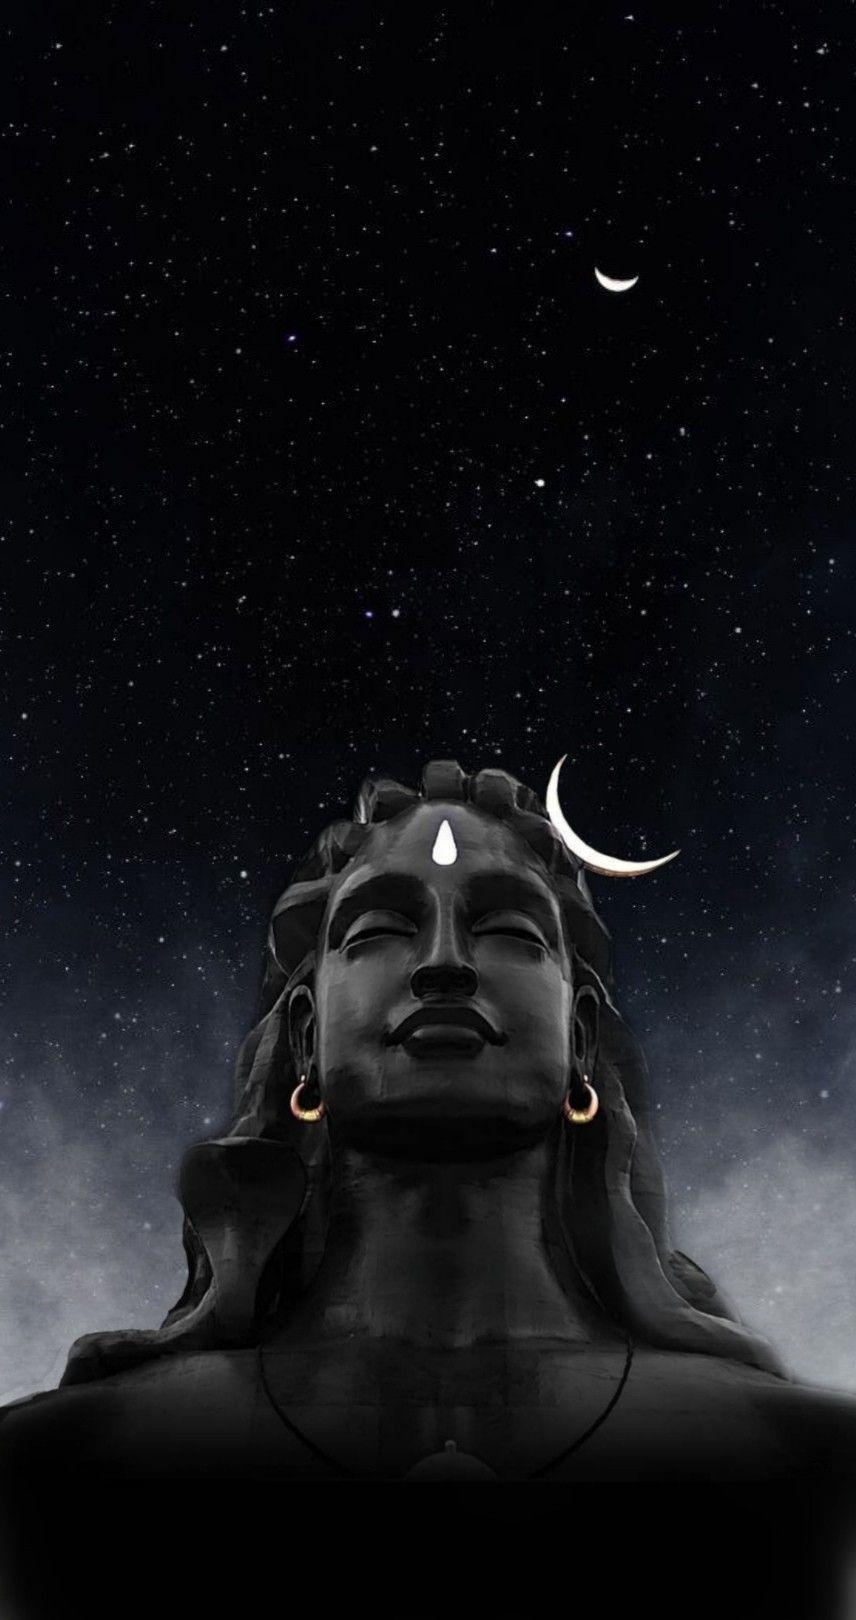 Wallpaper Lord Shiva Images Wallpapers